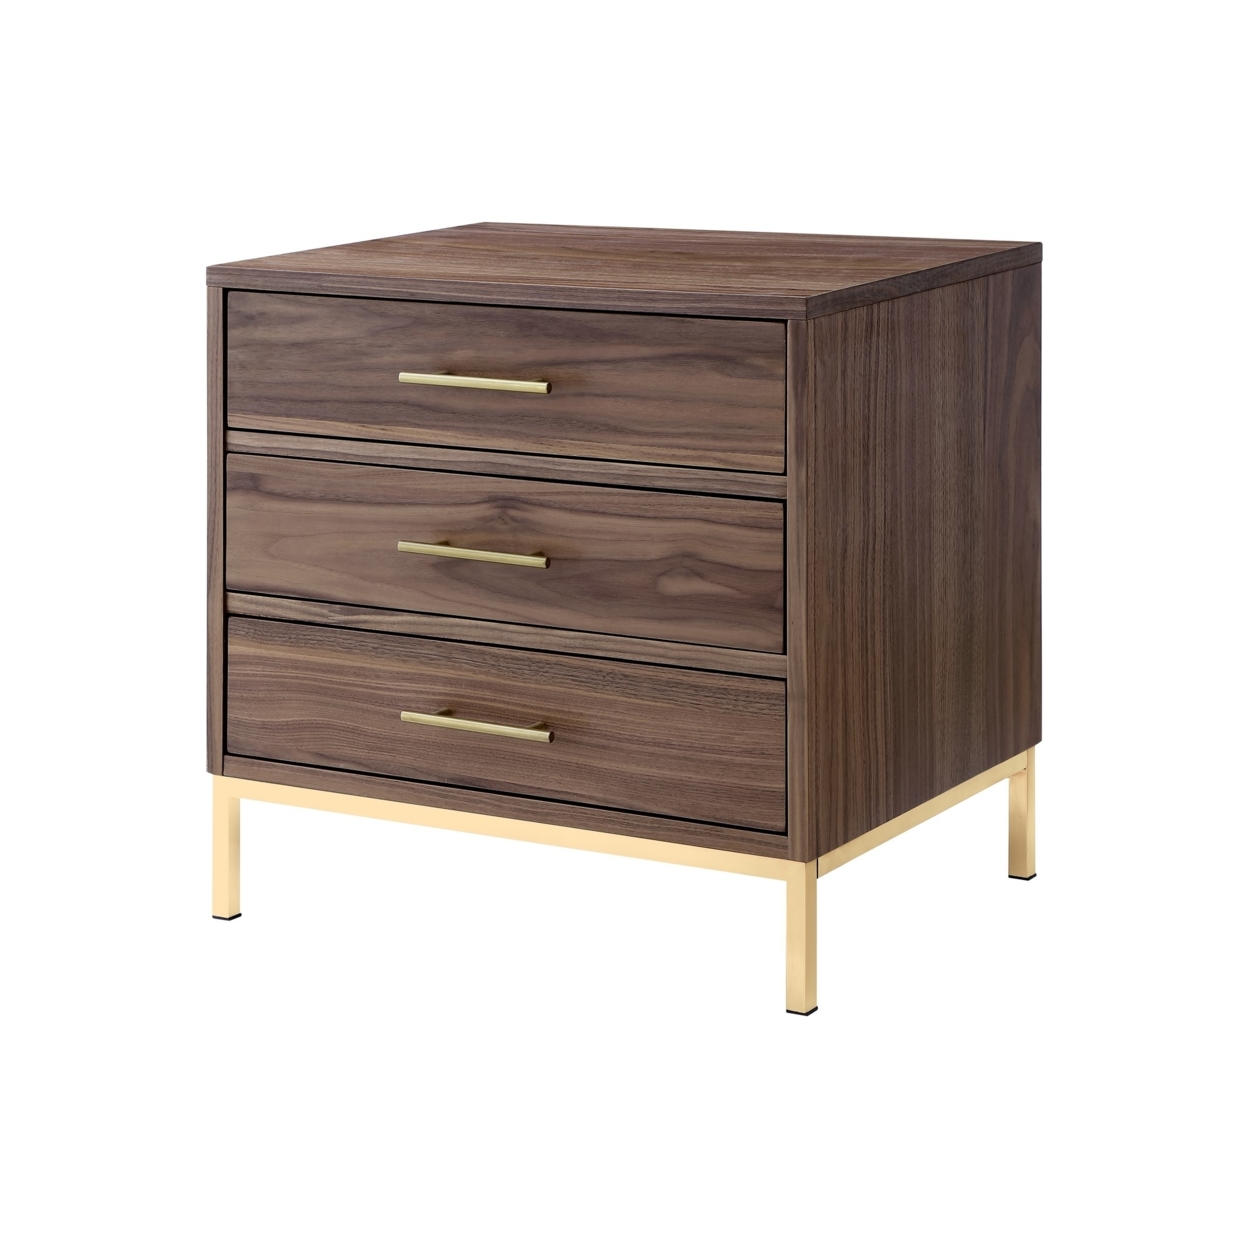 Treni 3 Drawers Nightstand-T-Bar Handle-Stainless Steel Base-Wood Finish-By Nicole Miller - Walnut/gold